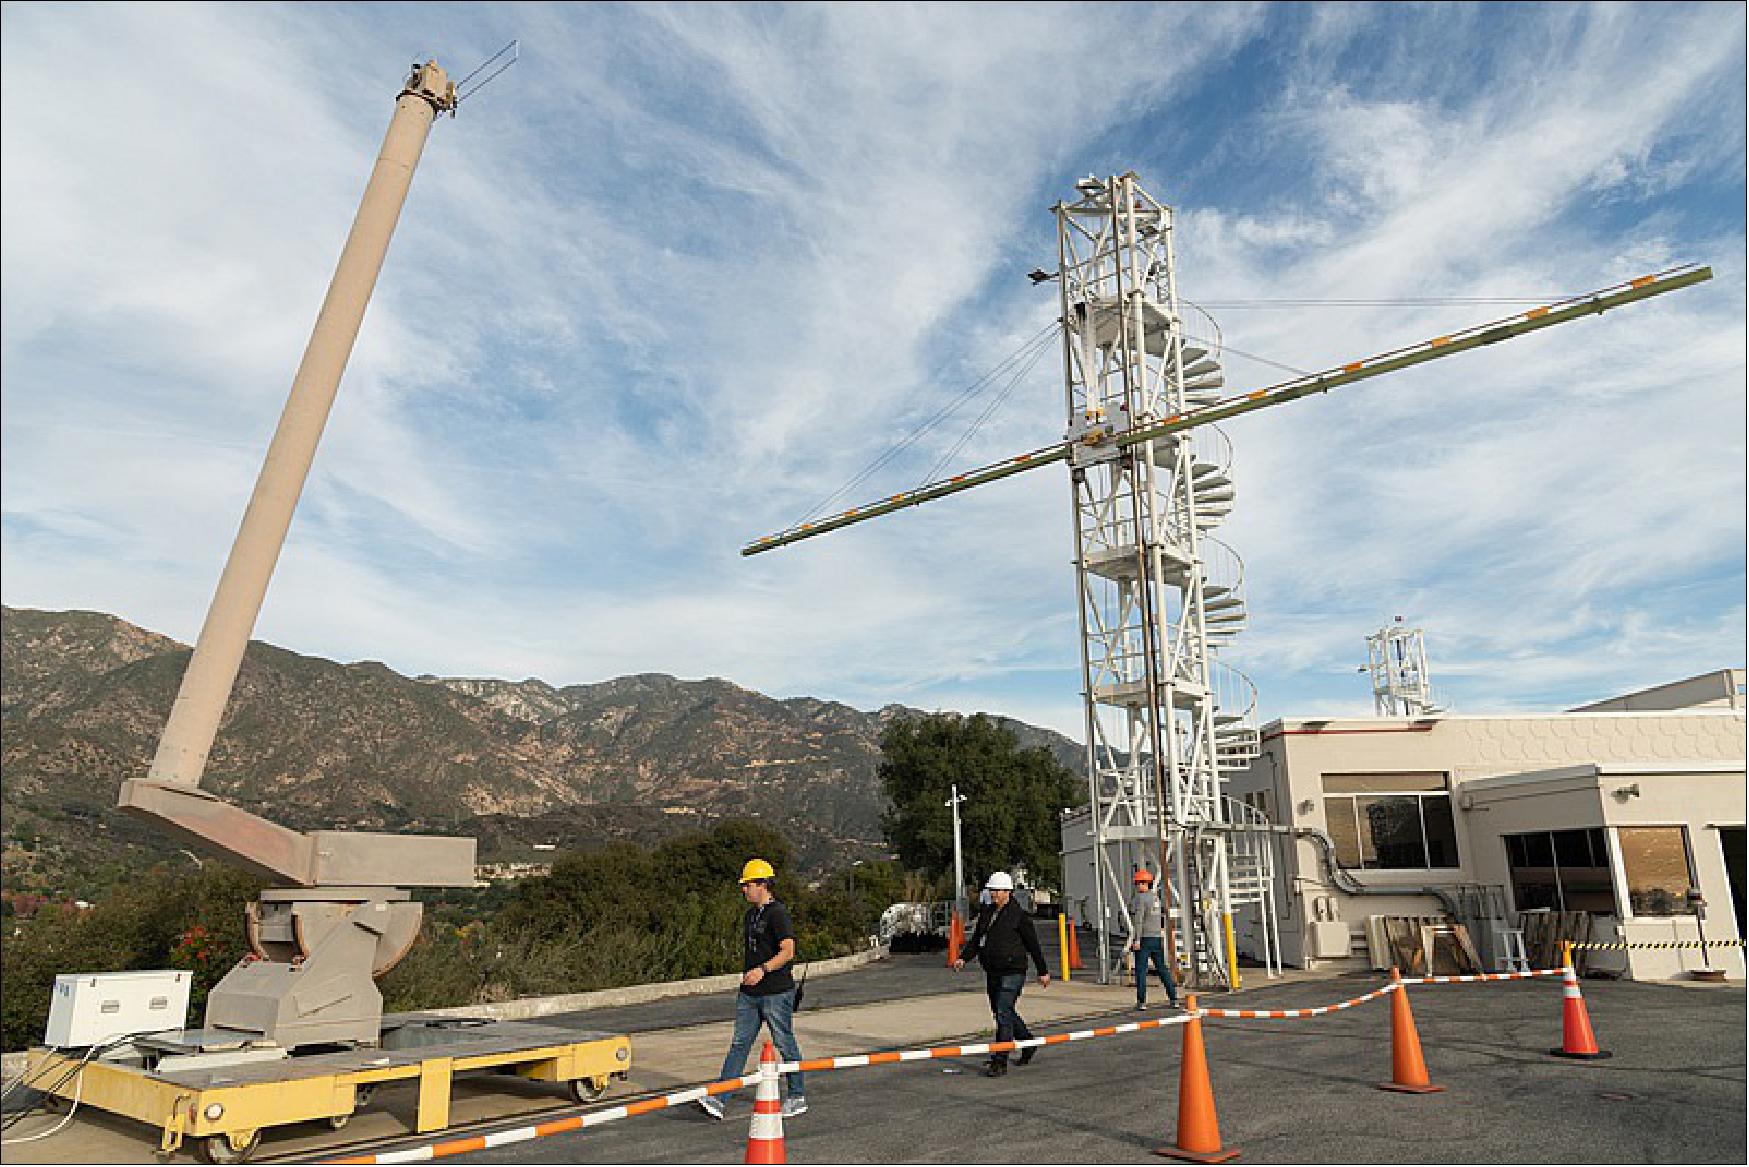 Figure 25: Engineers test one of two high frequency radar antennas for Europa Clipper's REASON instrument on a hilltop at NASA's Jet Propulsion Laboratory (image credit: NASA/JPL-Caltech)